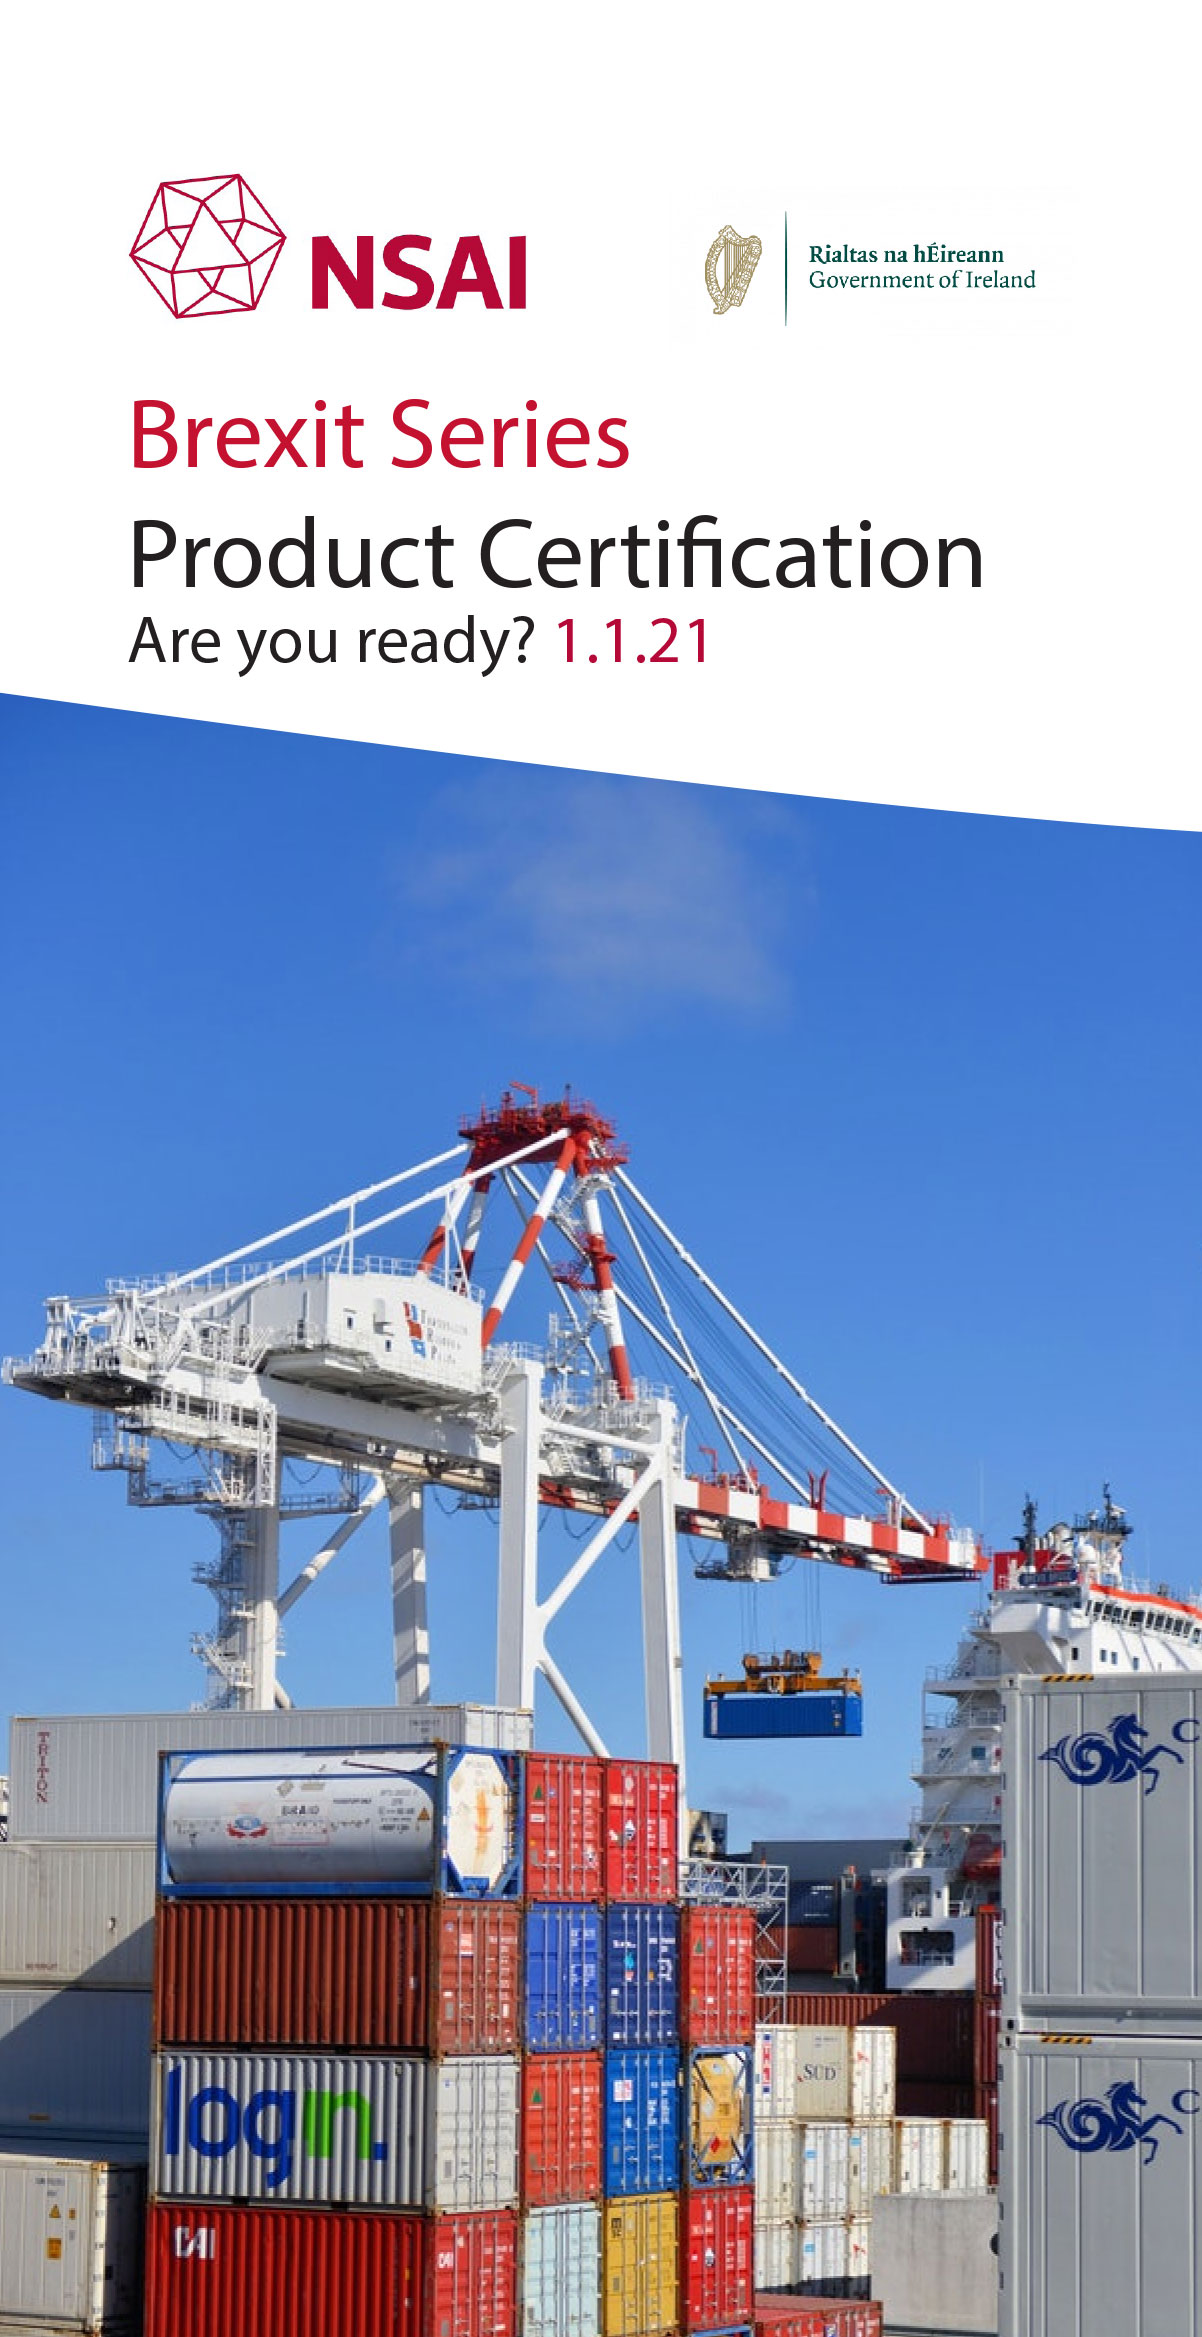 Brexit Series Product Certification Are you ready? 1.1.21